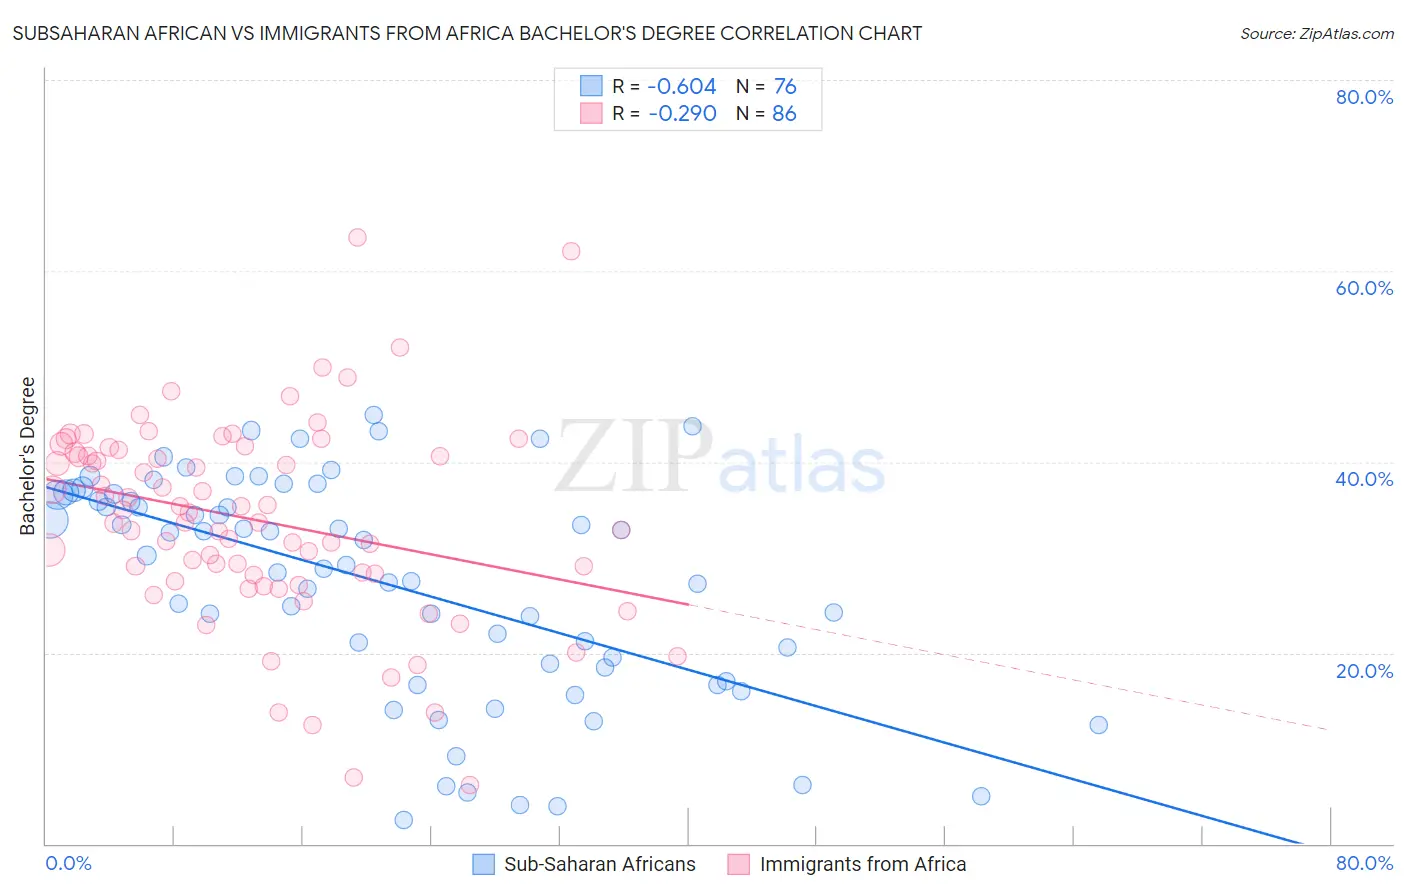 Subsaharan African vs Immigrants from Africa Bachelor's Degree